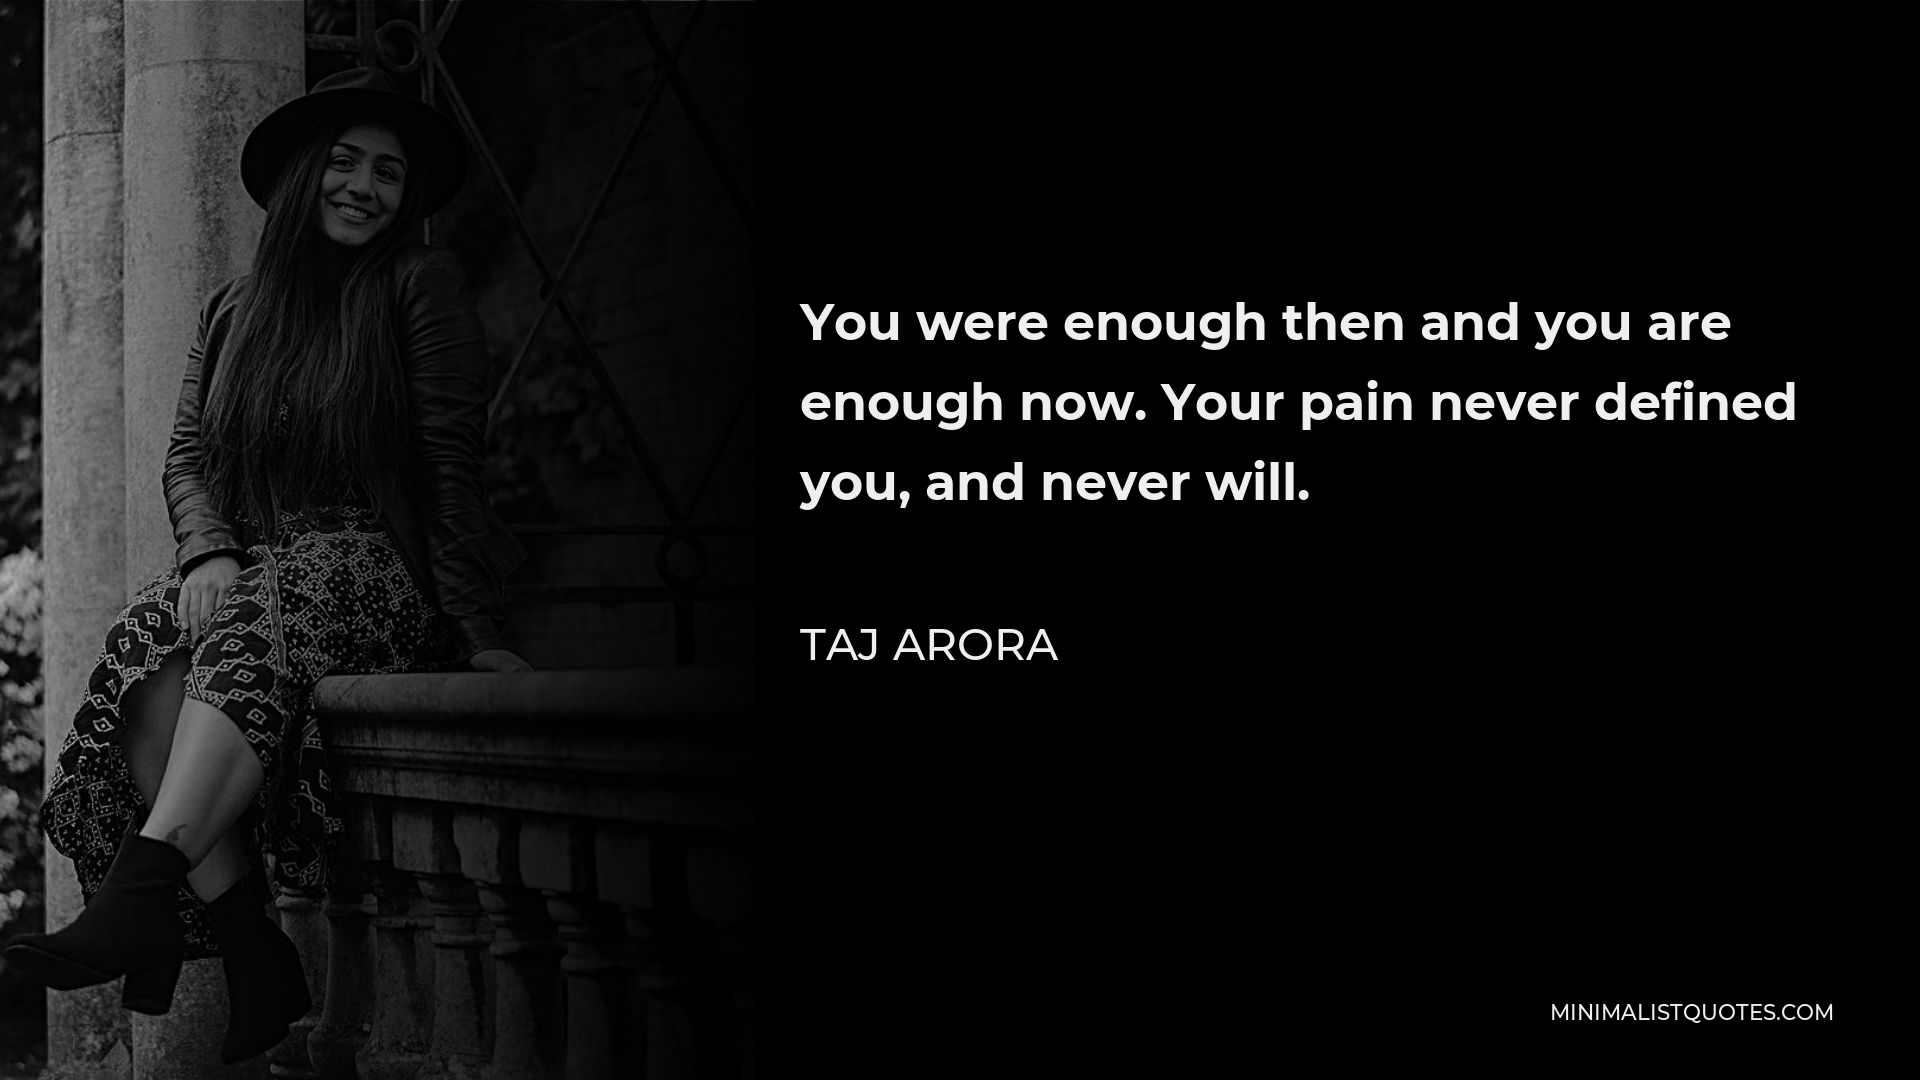 Taj Arora Quote - You were enough then and you are enough now. Your pain never defined you, and never will.